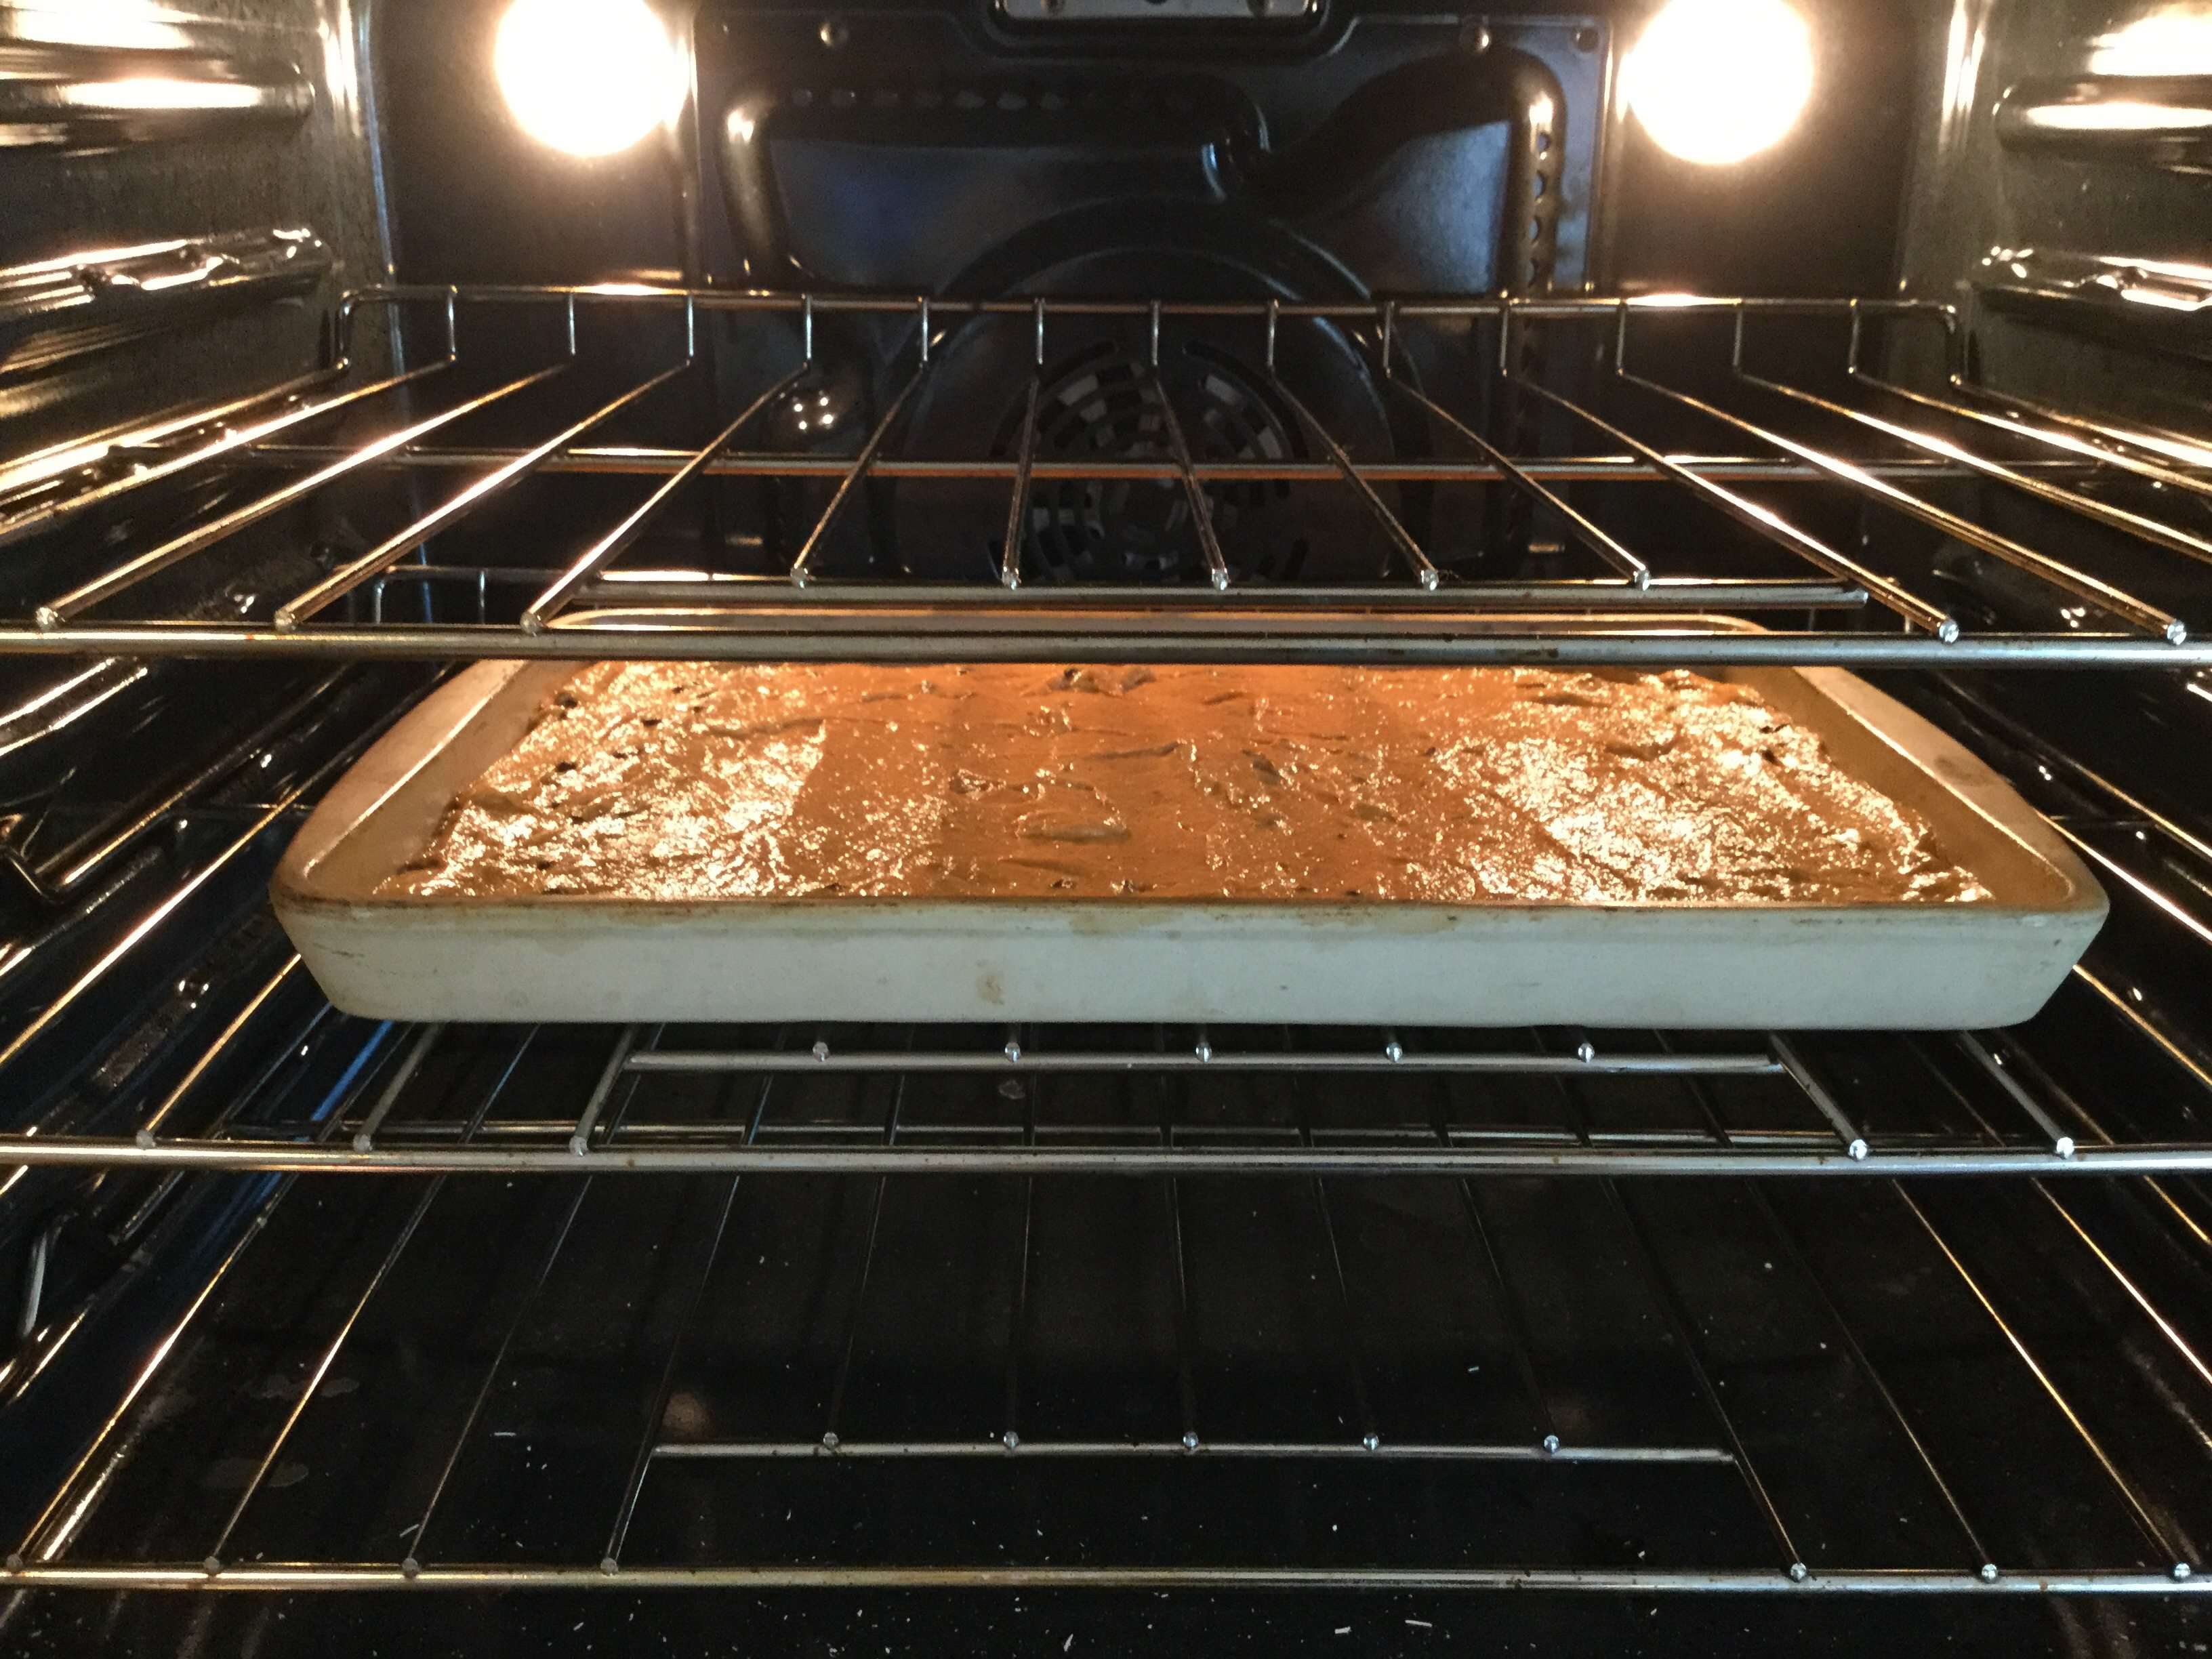 Place in the oven and bake at 350 degrees for 25 minutes.